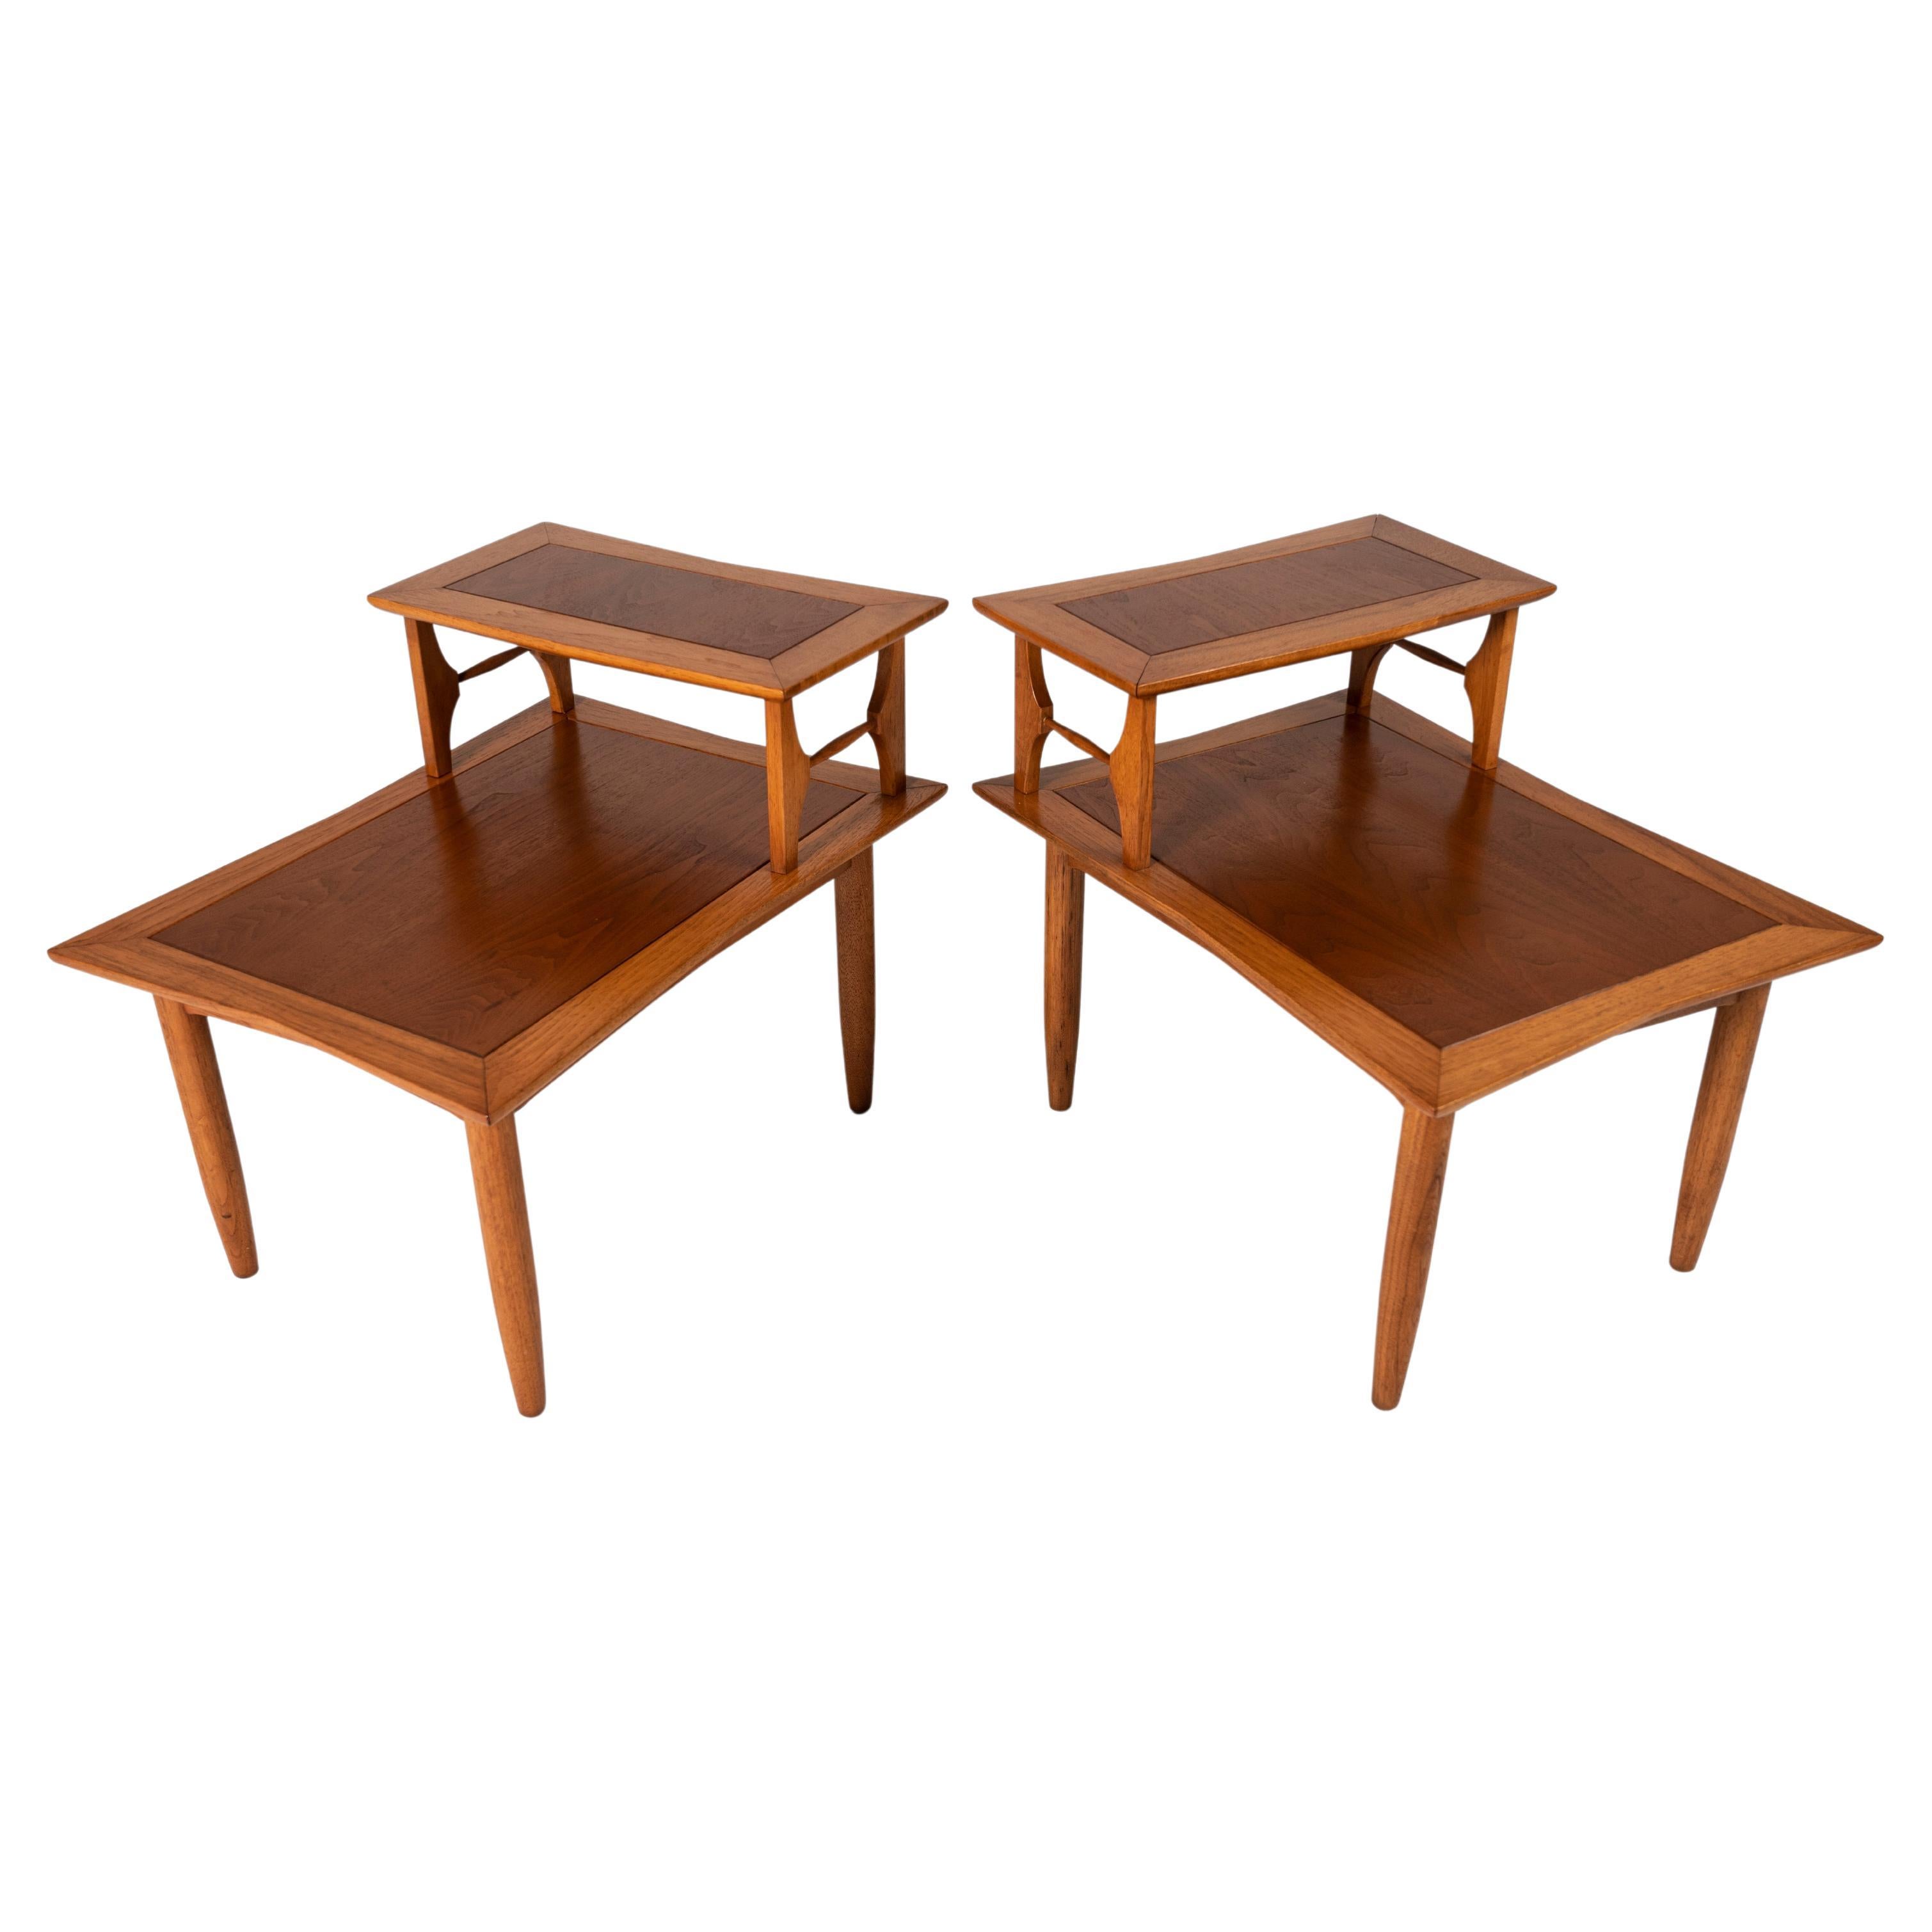 Pair of 2-Tier Mid-Century Modern End Tables Attributed to Lubberts & Mulder For Sale